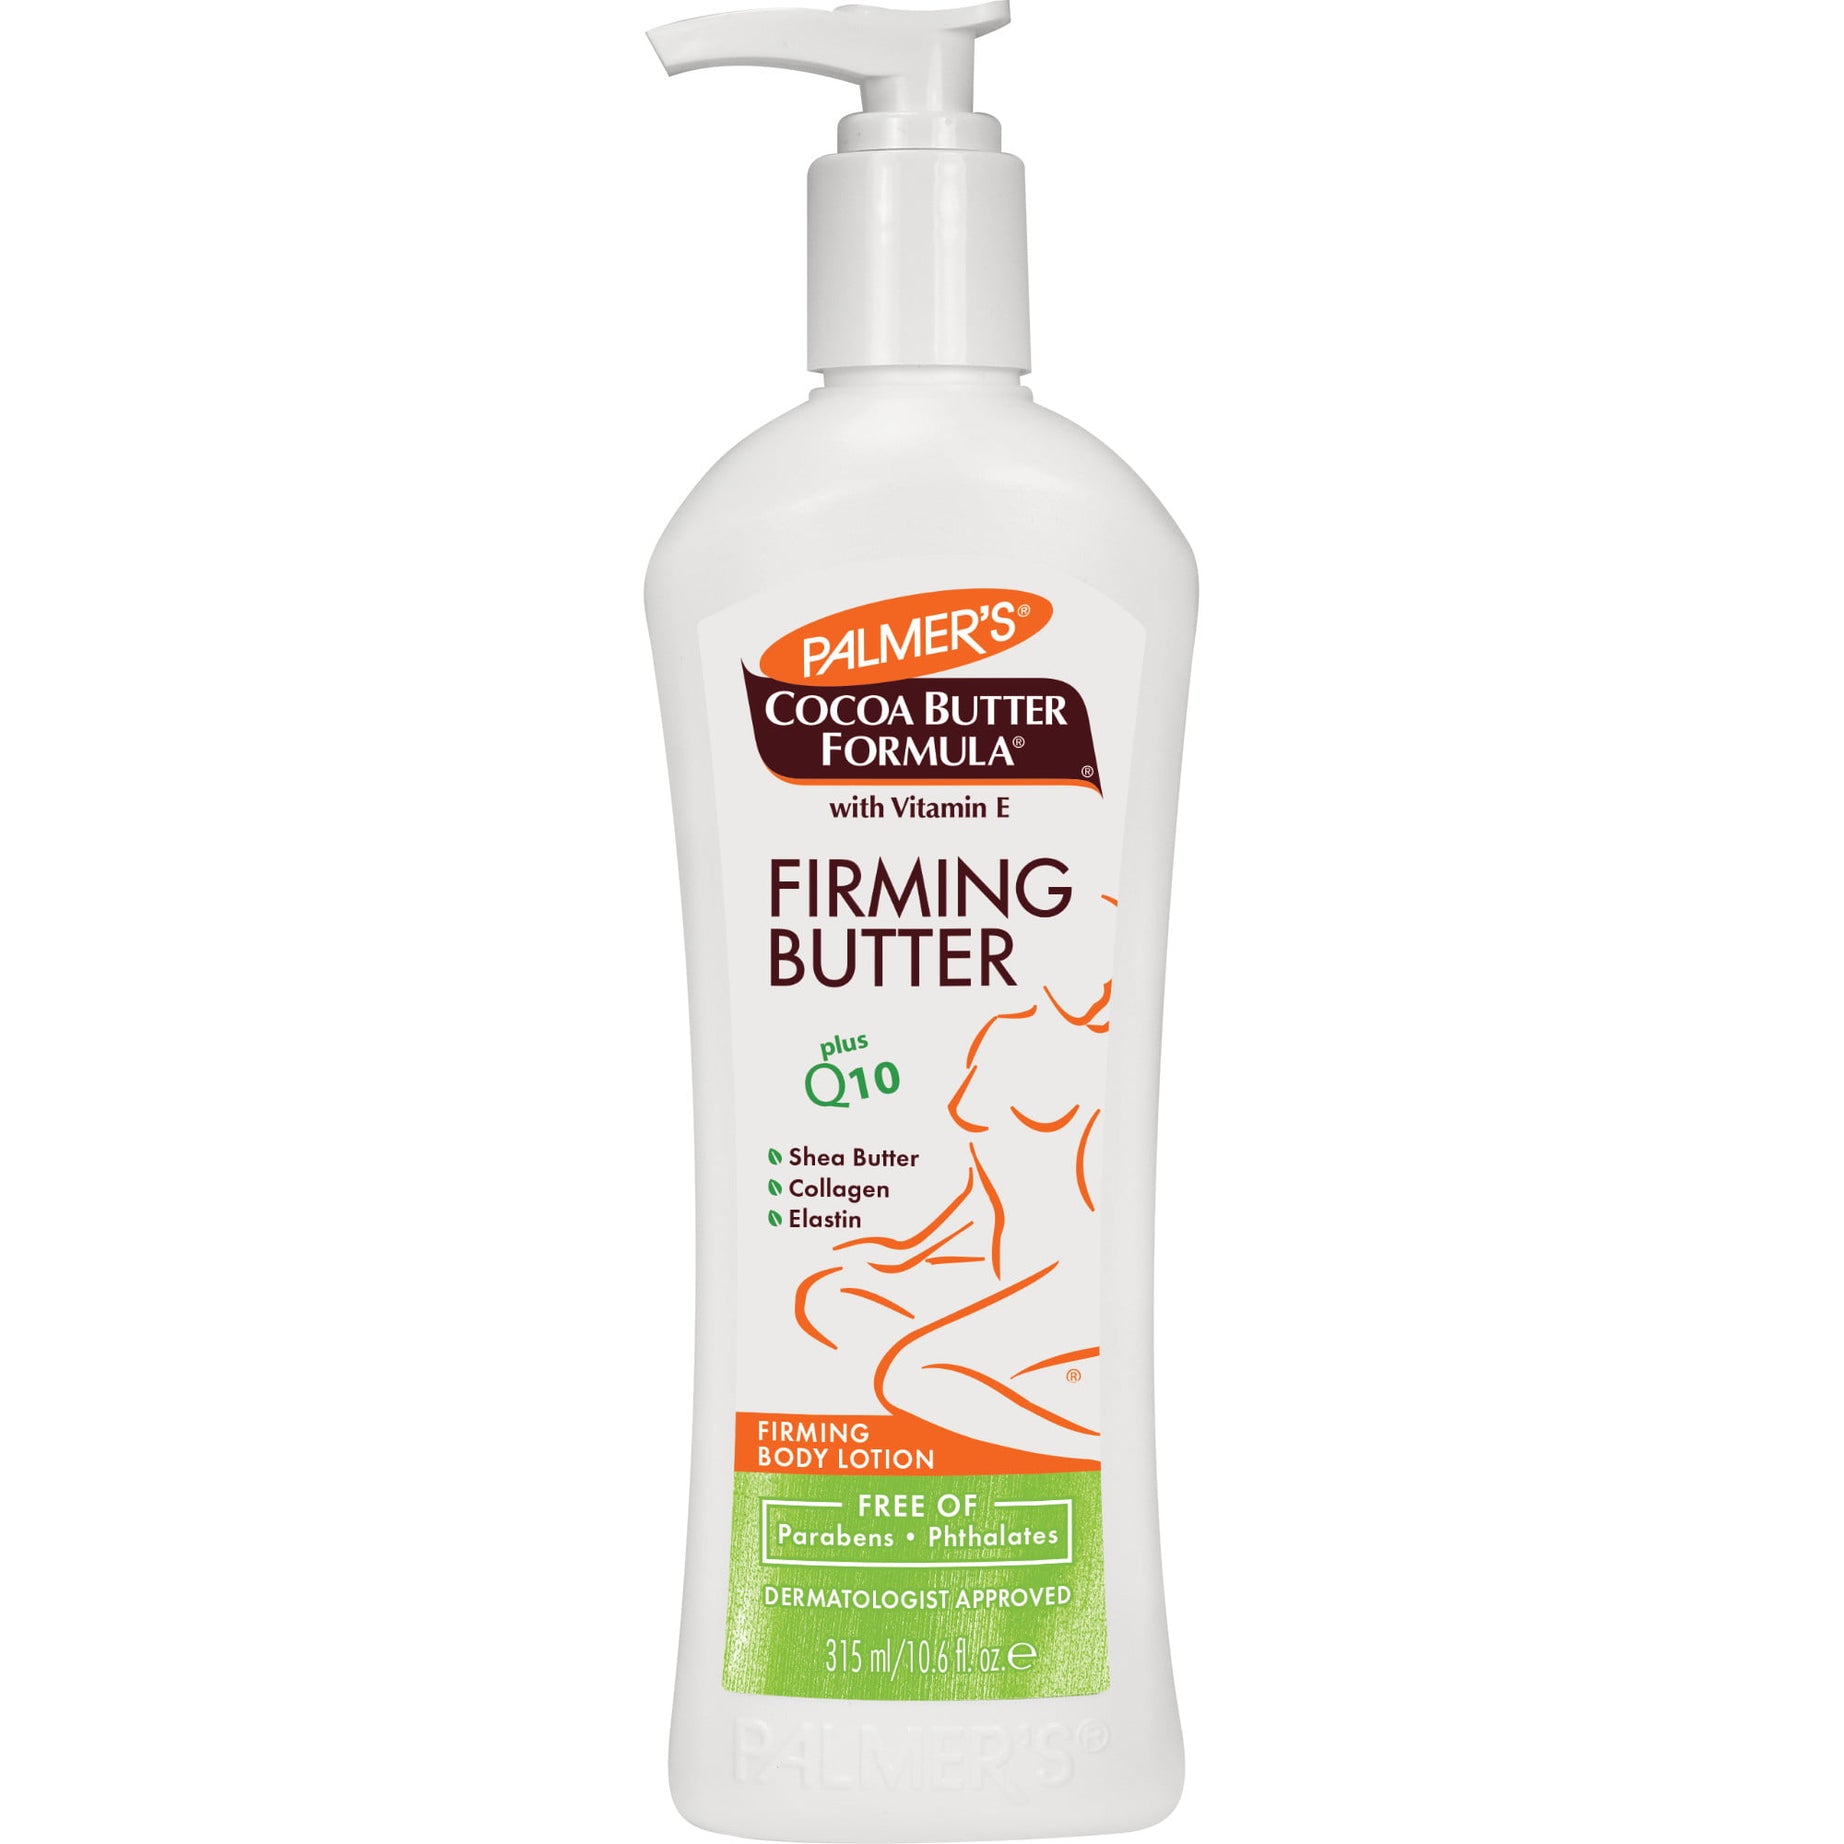 Palmer's Cocoa Butter Formula Firming Butter Lotion, 10.6 fl. oz.